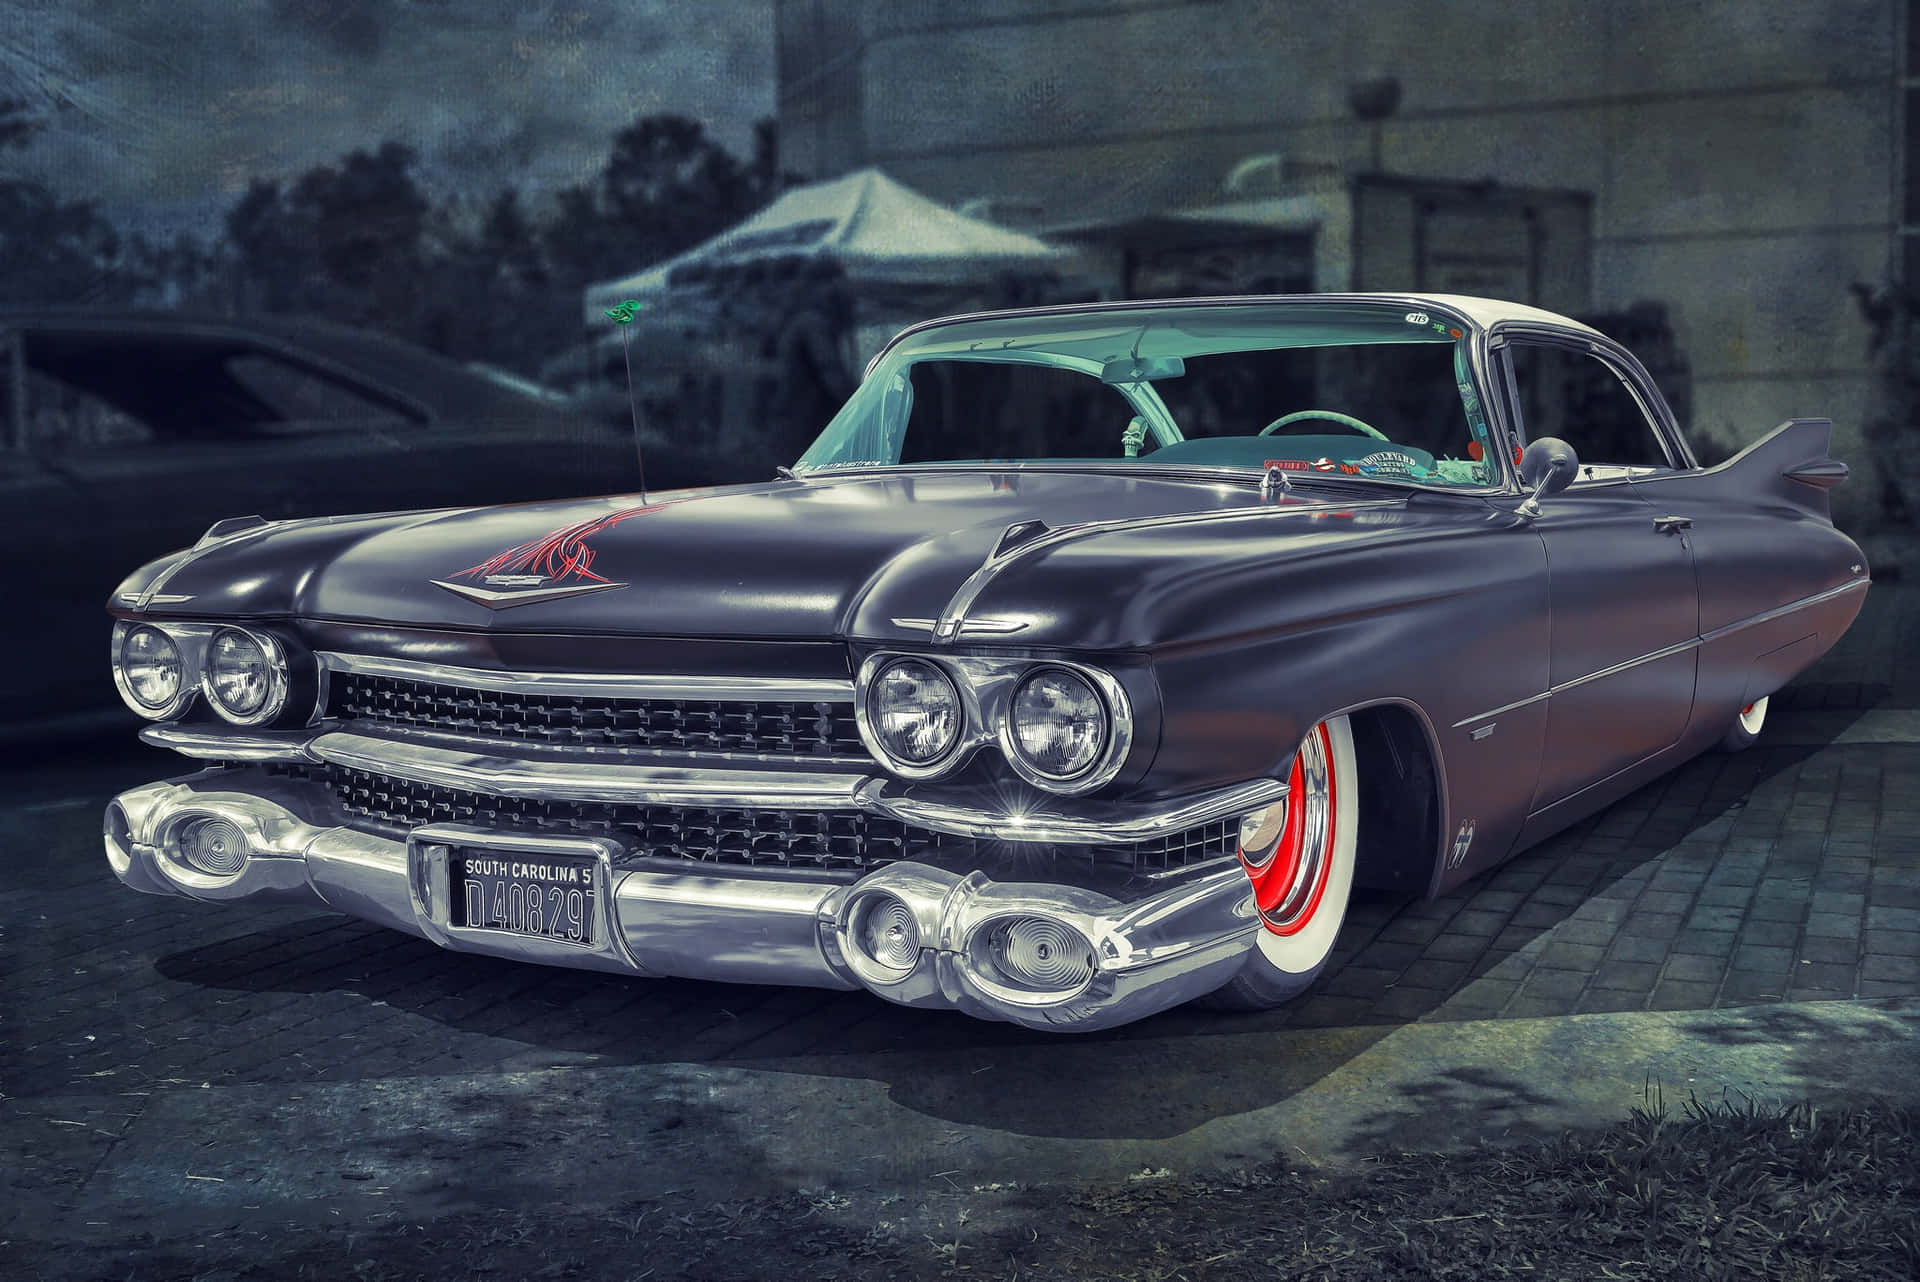 Elegance and Power: The Cadillac Fleetwood Wallpaper